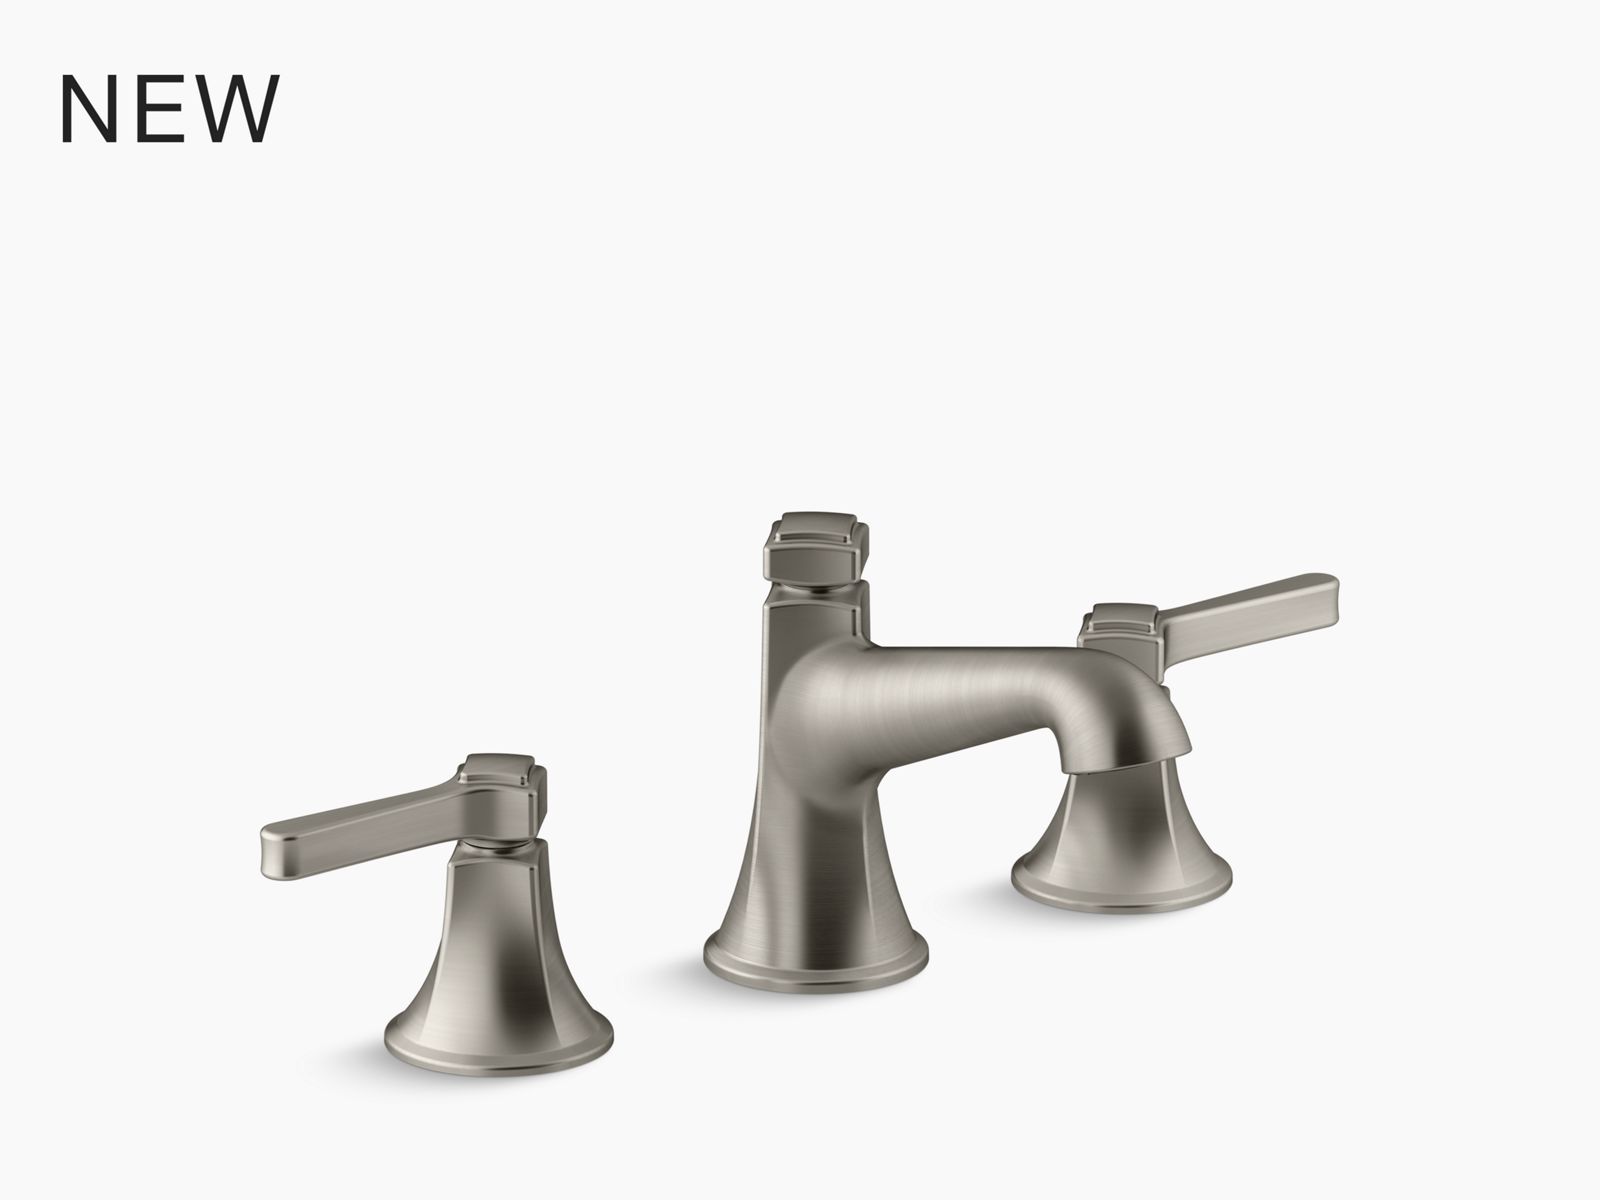 TAUT Cold Water Lavatory Faucet